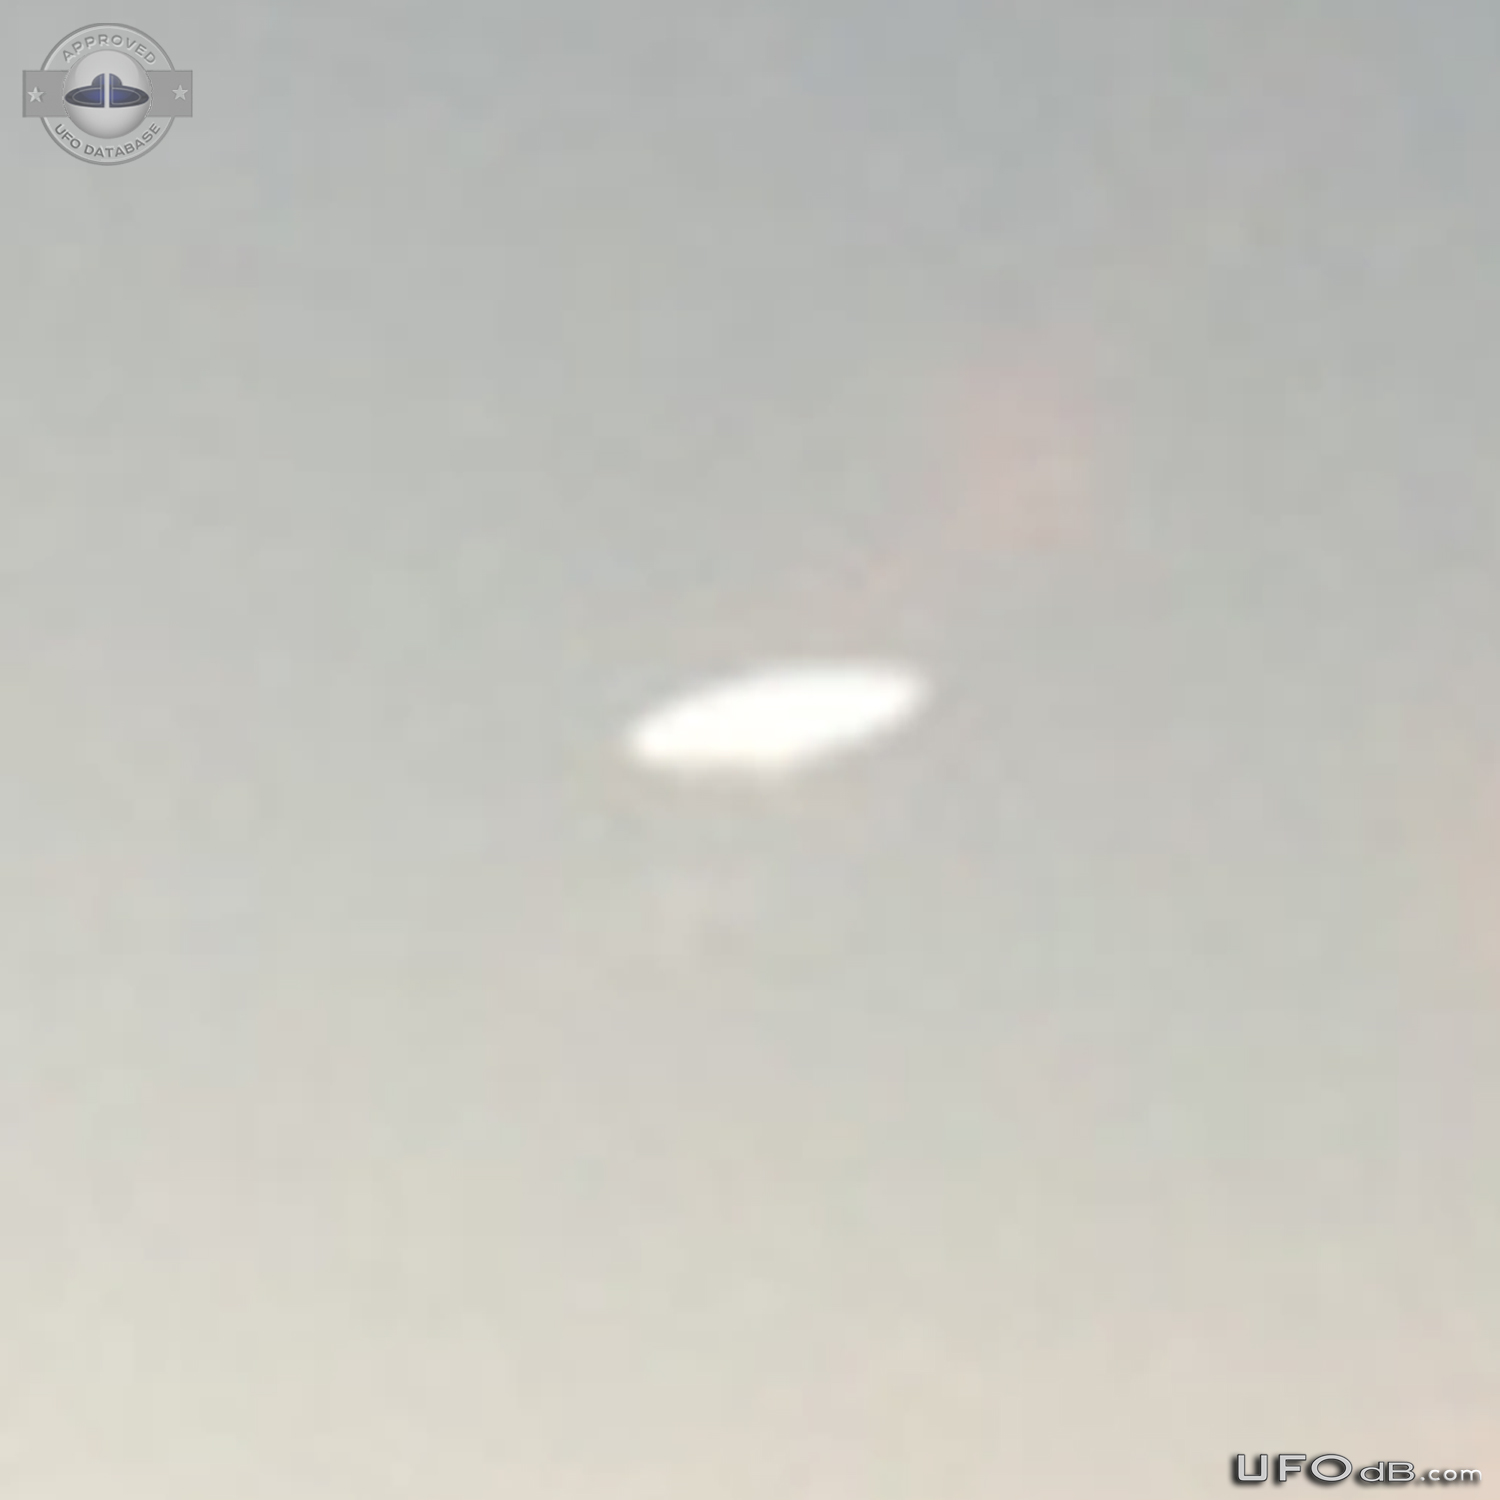 Morning UFO sighting in the sky above Barnoldswick, Lancashire UK 2013 UFO Picture #554-5